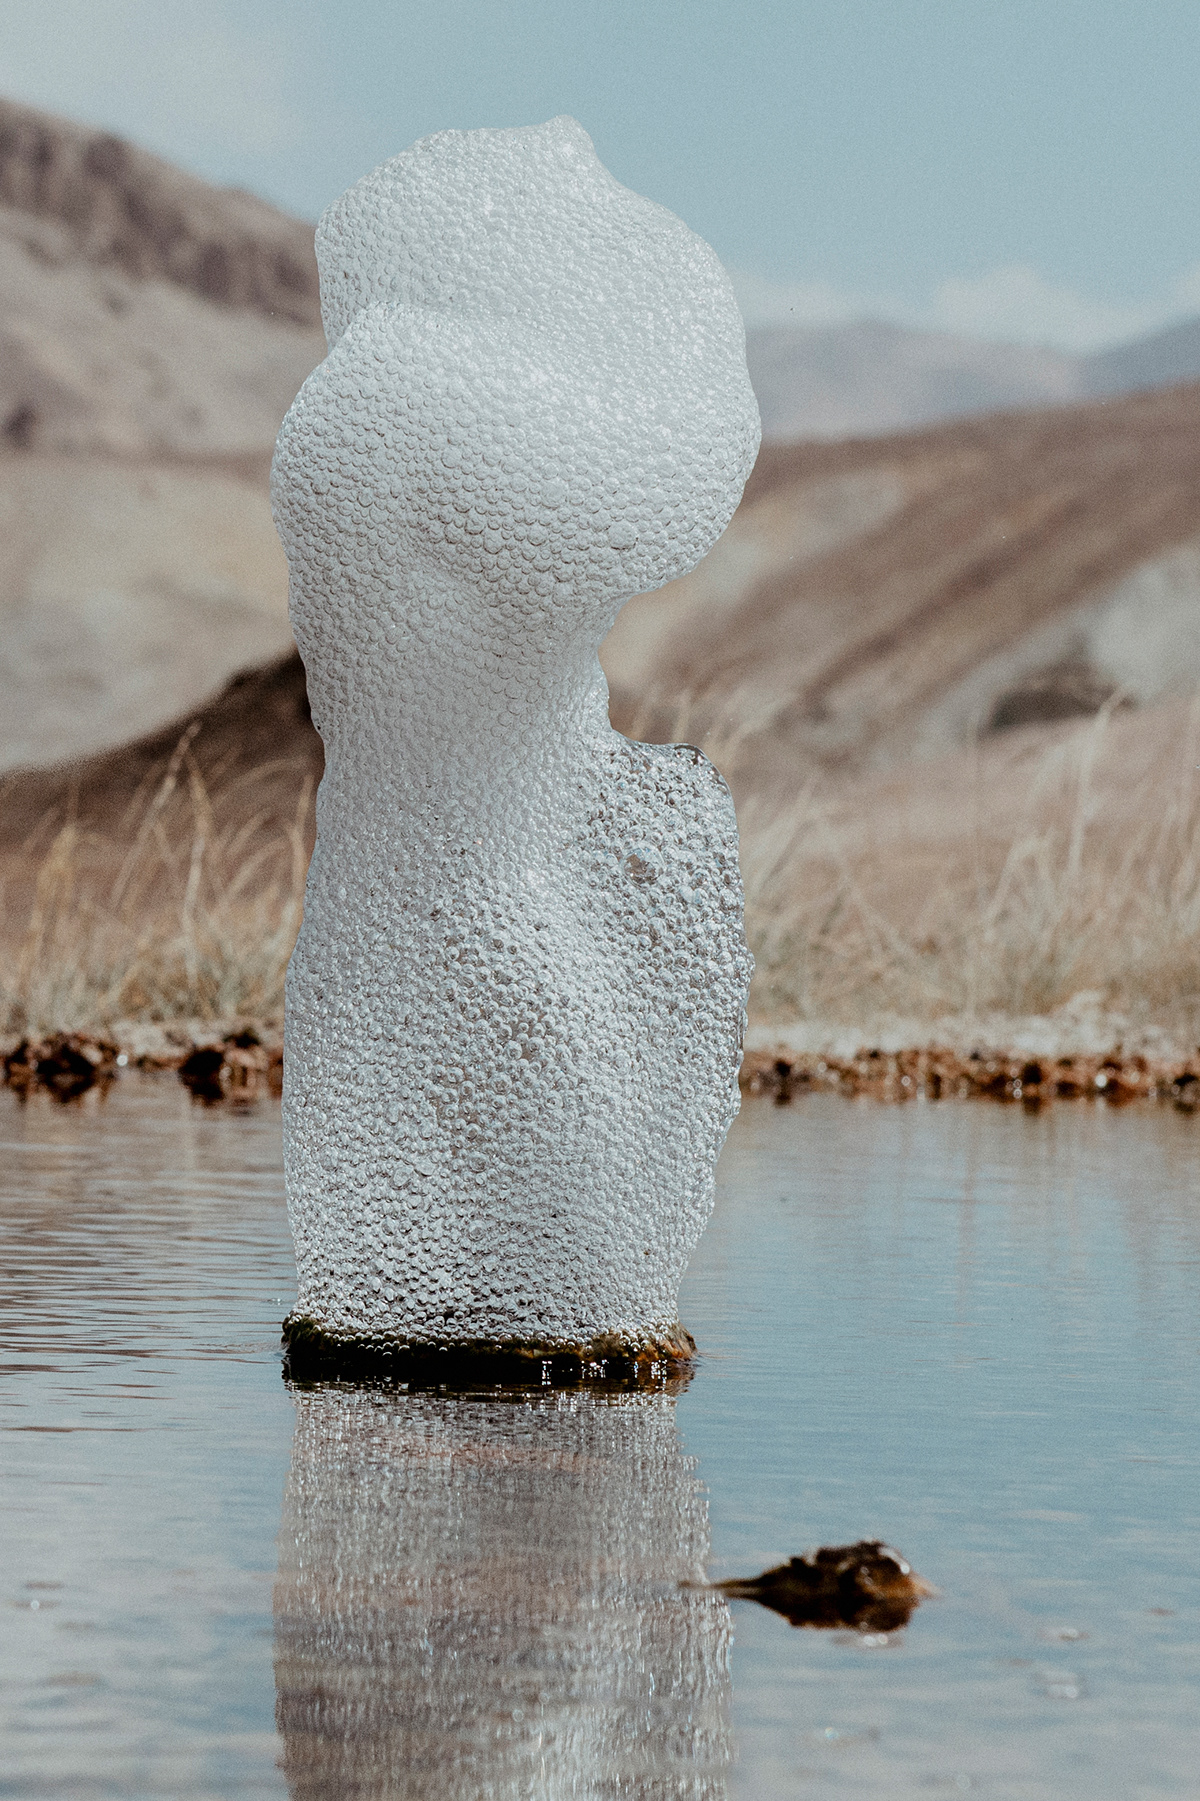 water Nature Photography  geyser sculpture abstract shapes Travel outdoors shutterspeed